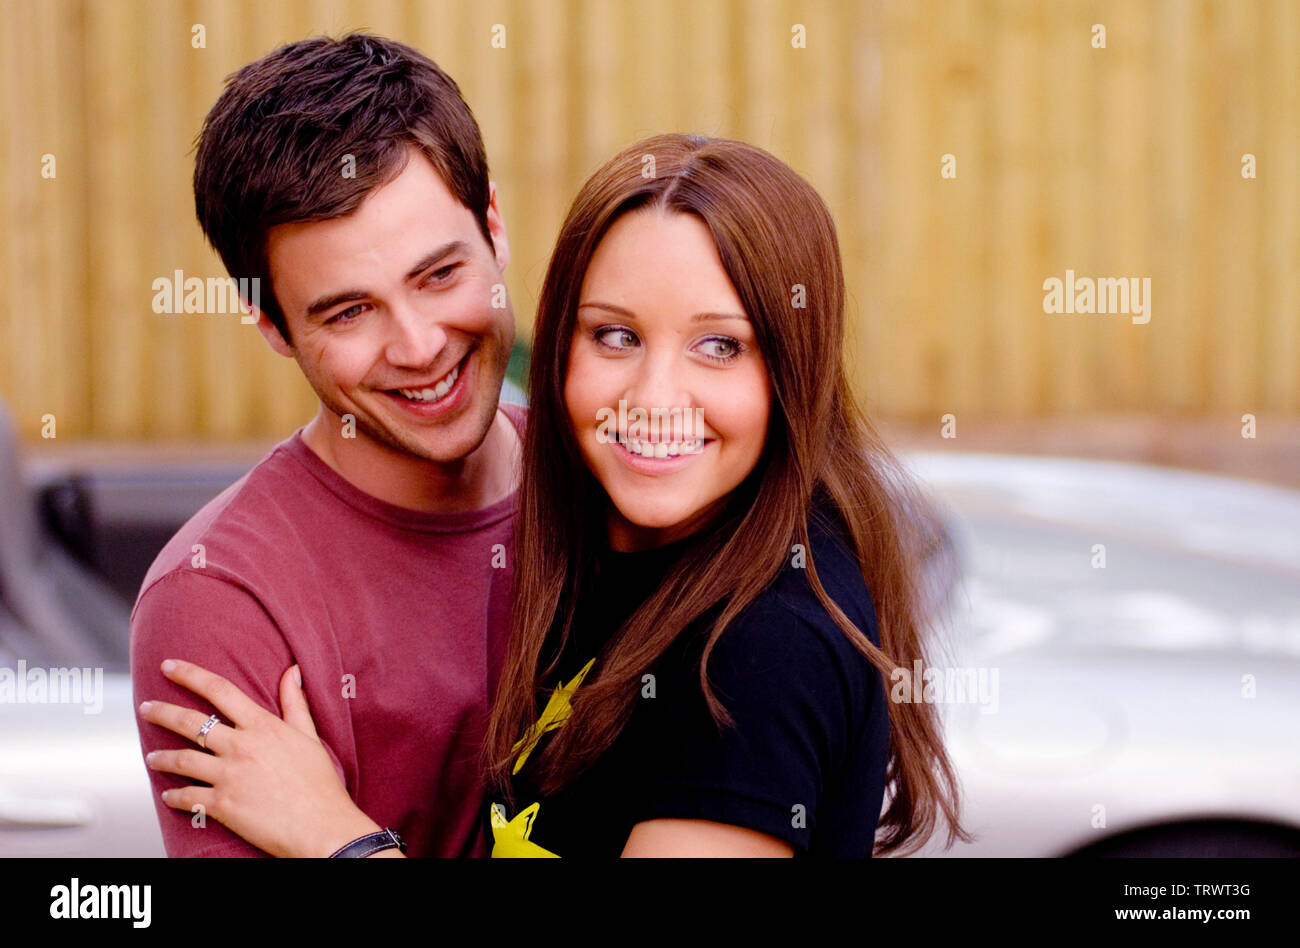 AMANDA BYNES and MATT LONG in SYDNEY WHITE (2007). Copyright: Editorial use only. No merchandising or book covers. This is a publicly distributed handout. Access rights only, no license of copyright provided. Only to be reproduced in conjunction with promotion of this film. Credit: MORGAN CREEK PROD./SW7D PROD./CLIFFORD WERBER PROD. / PAGE, GENE / Album Stock Photo